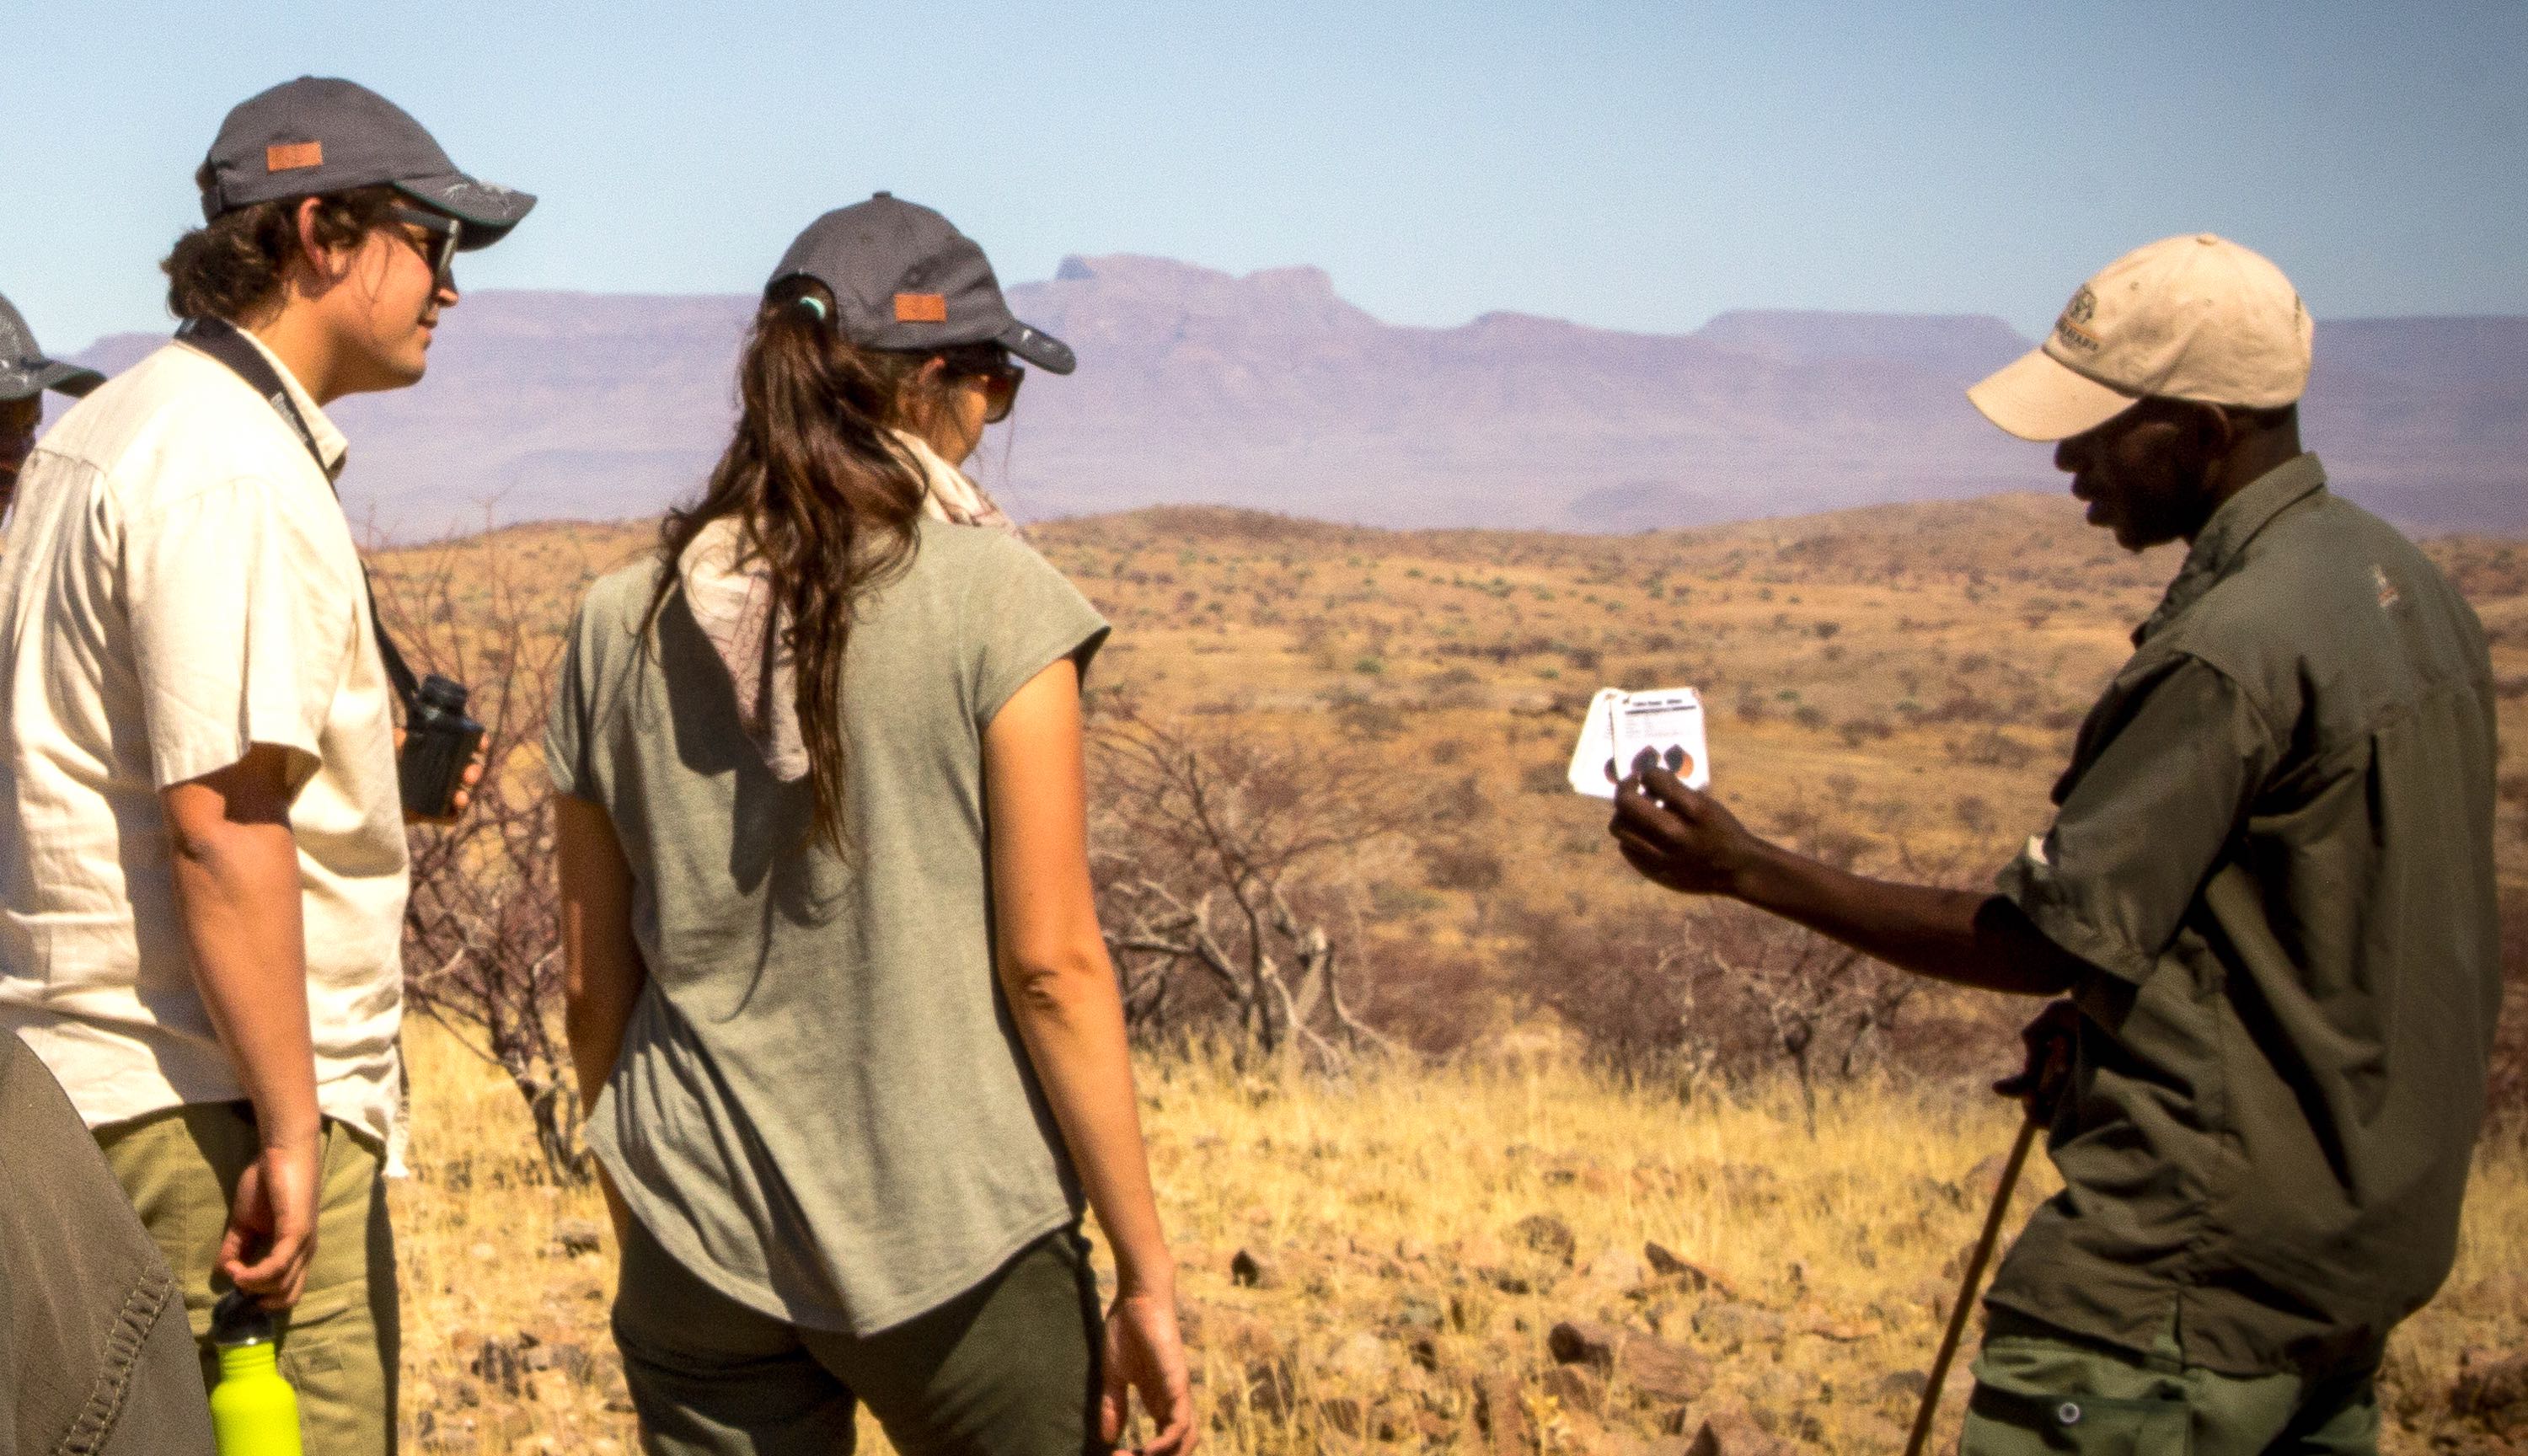 A ranger explains to to identify individual rhinos to two tourists.